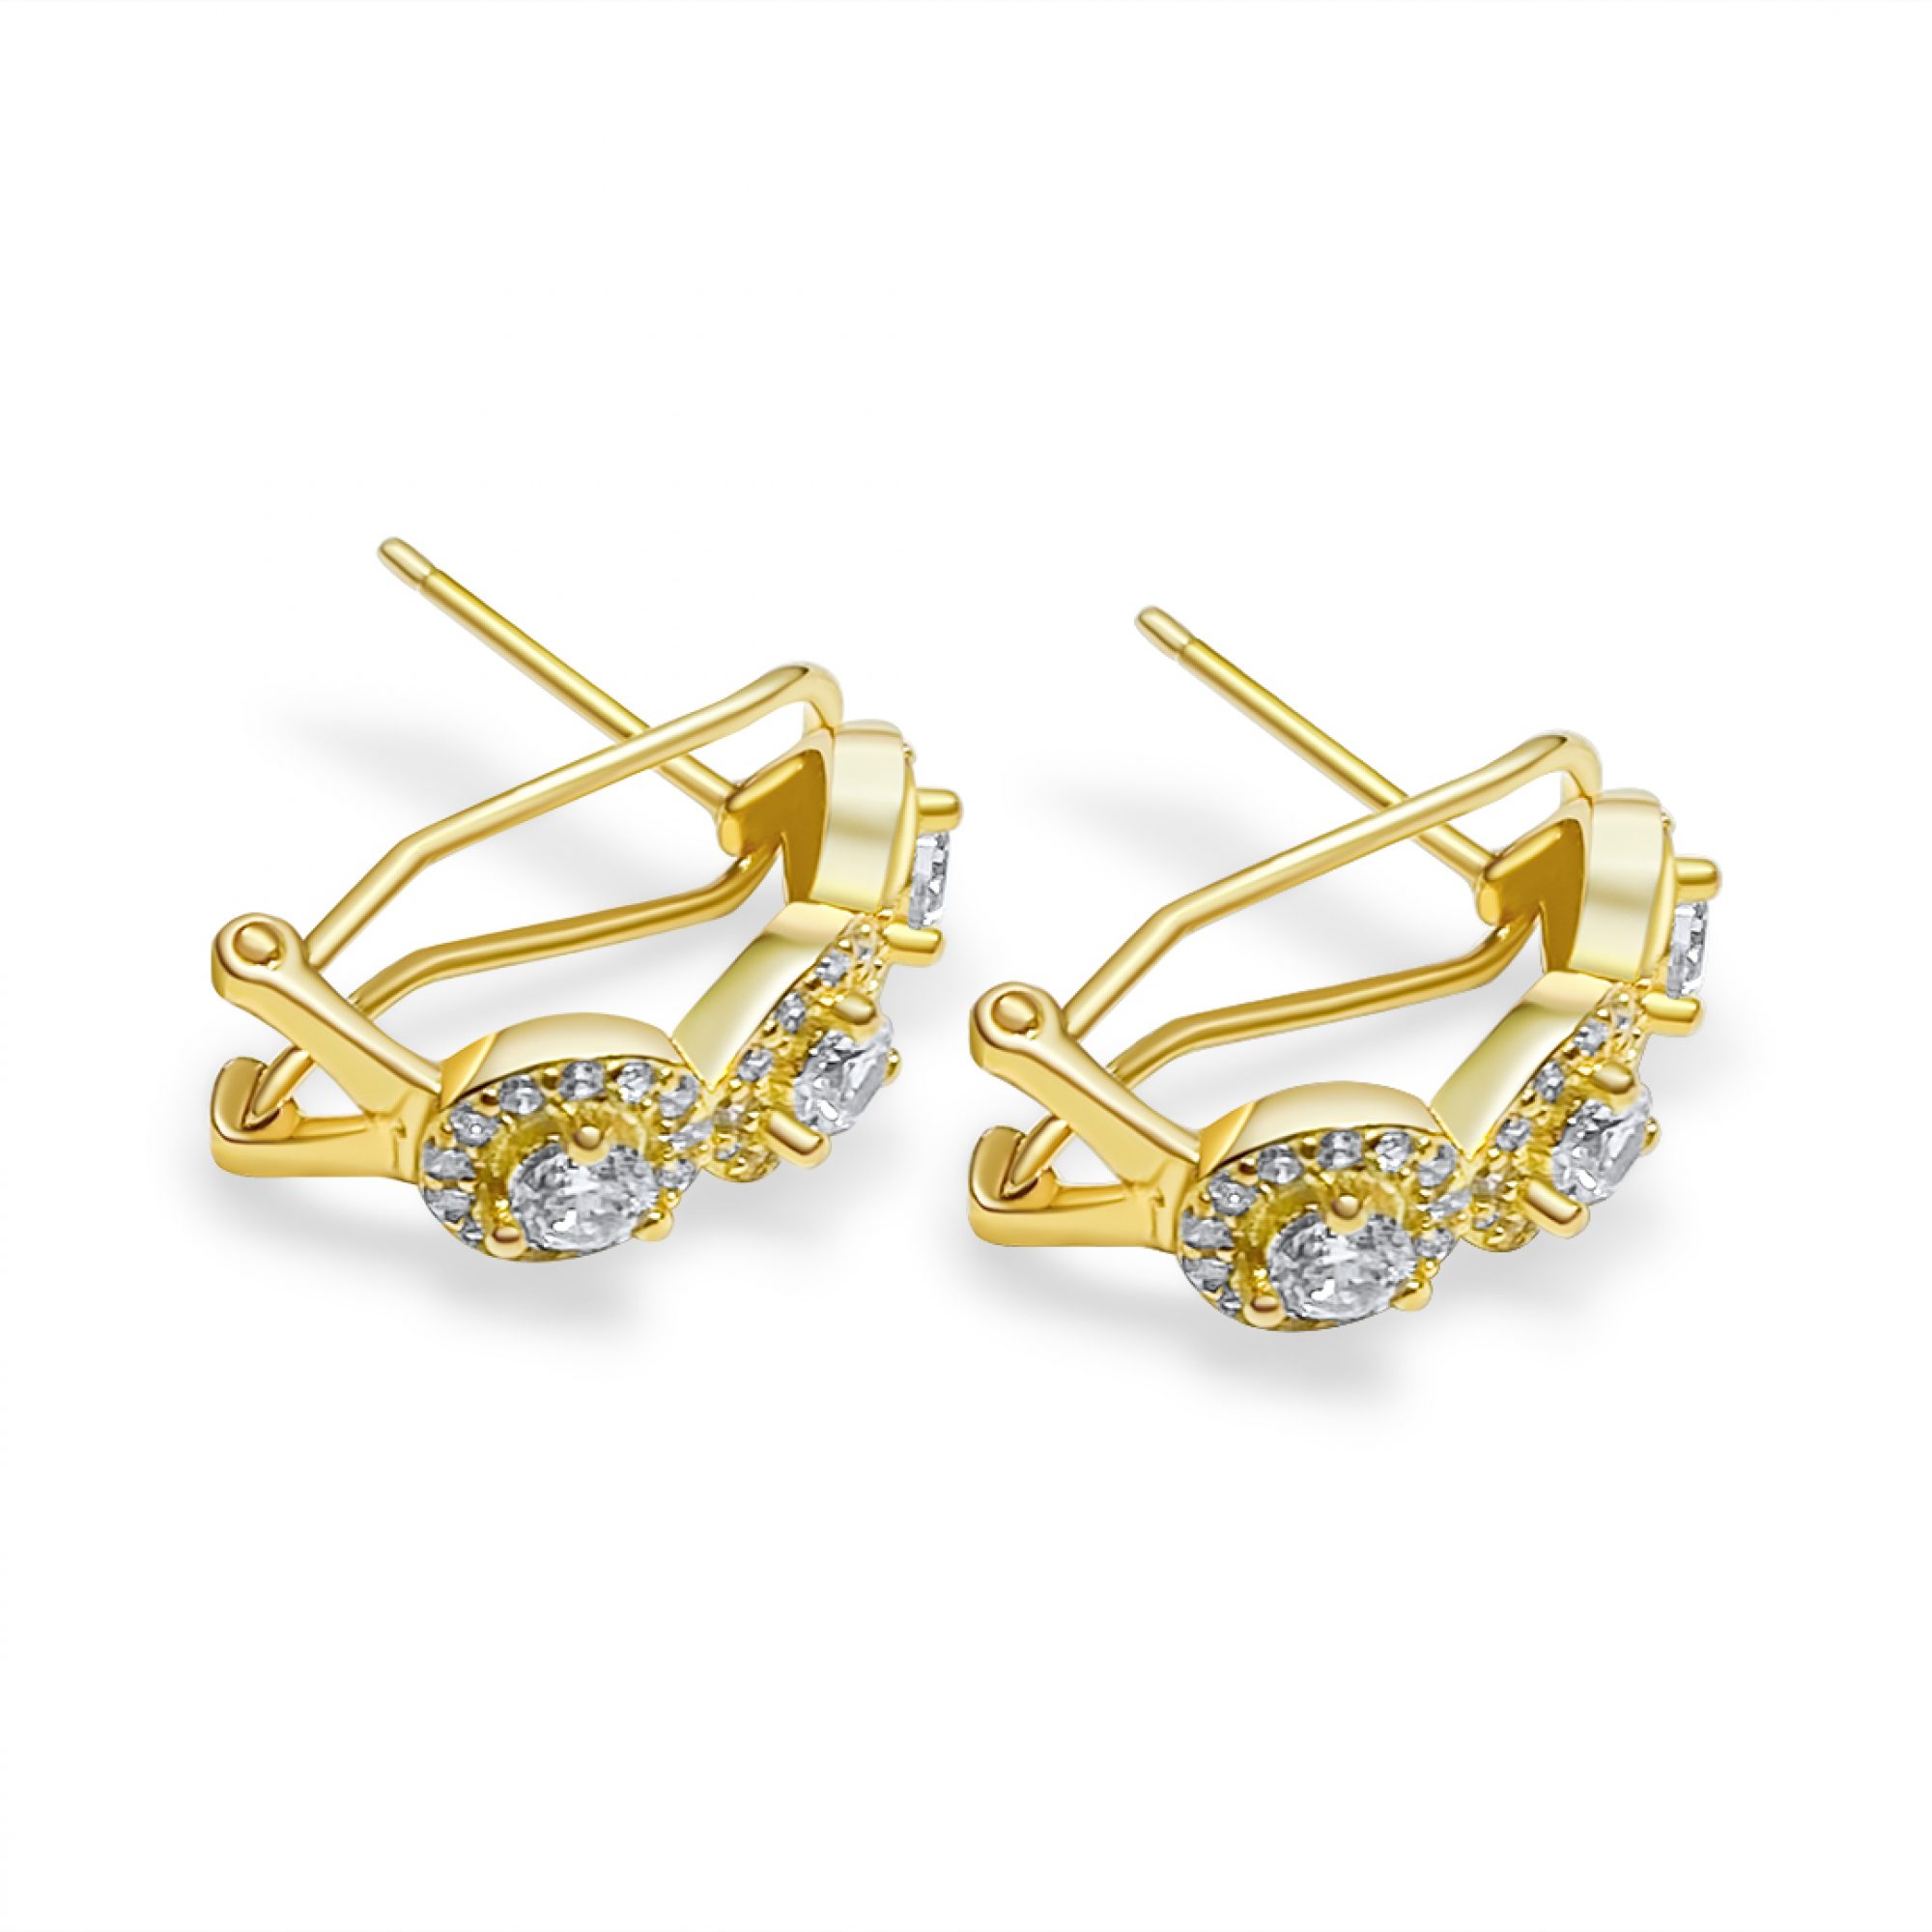 Gold plated earrings with zircon stones